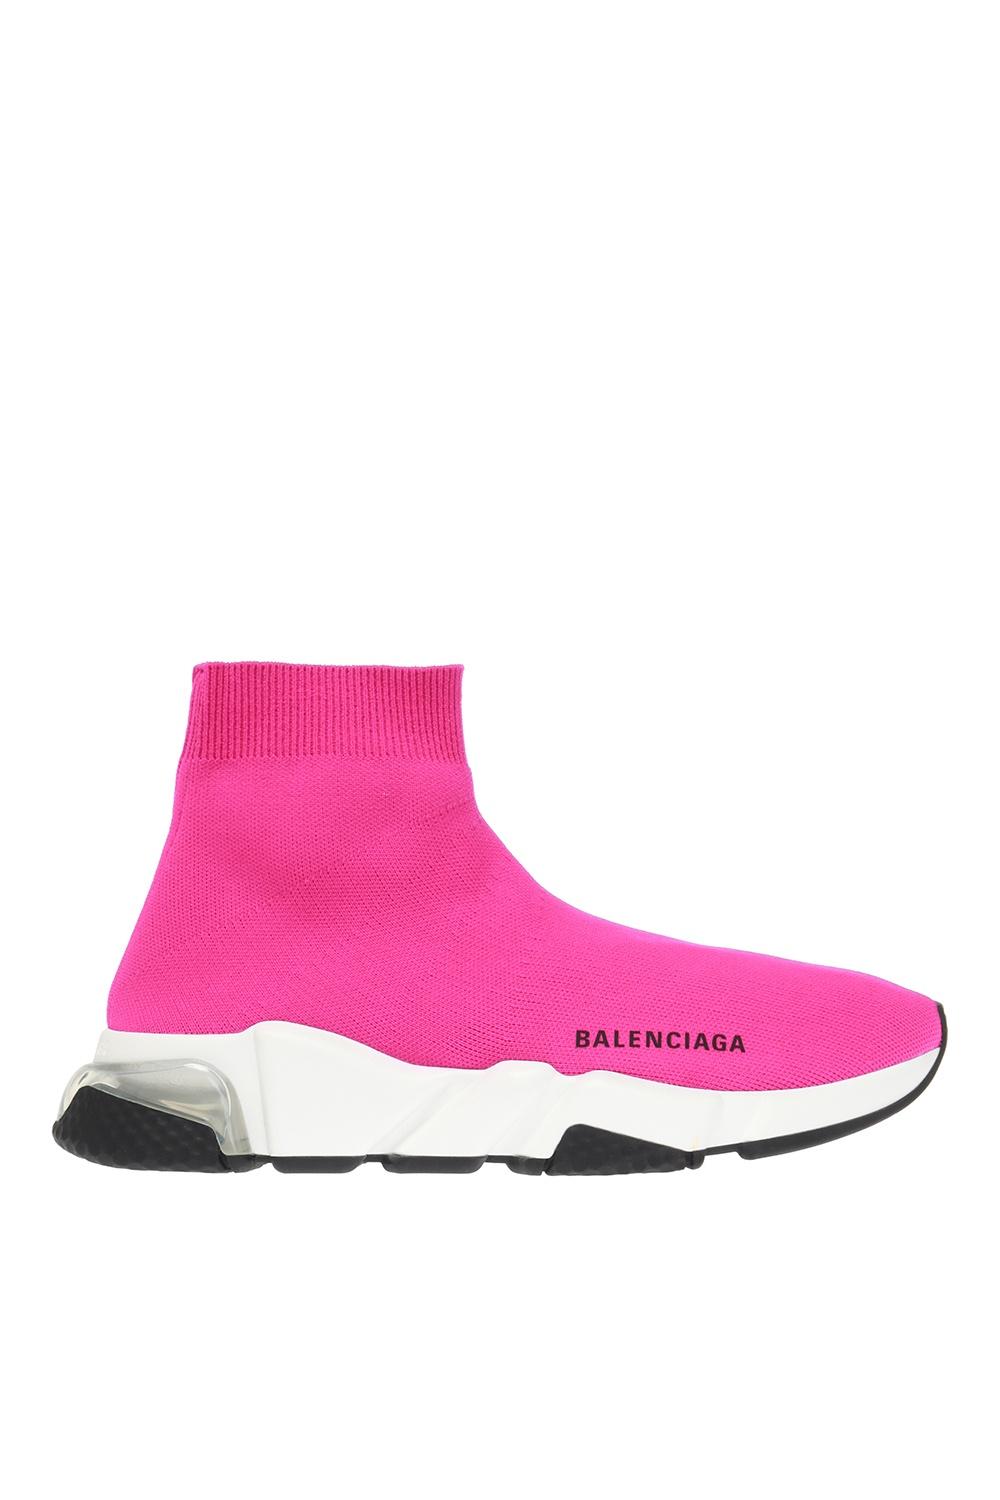 Balenciaga Speed Knitted Trainers in Pink | Lyst